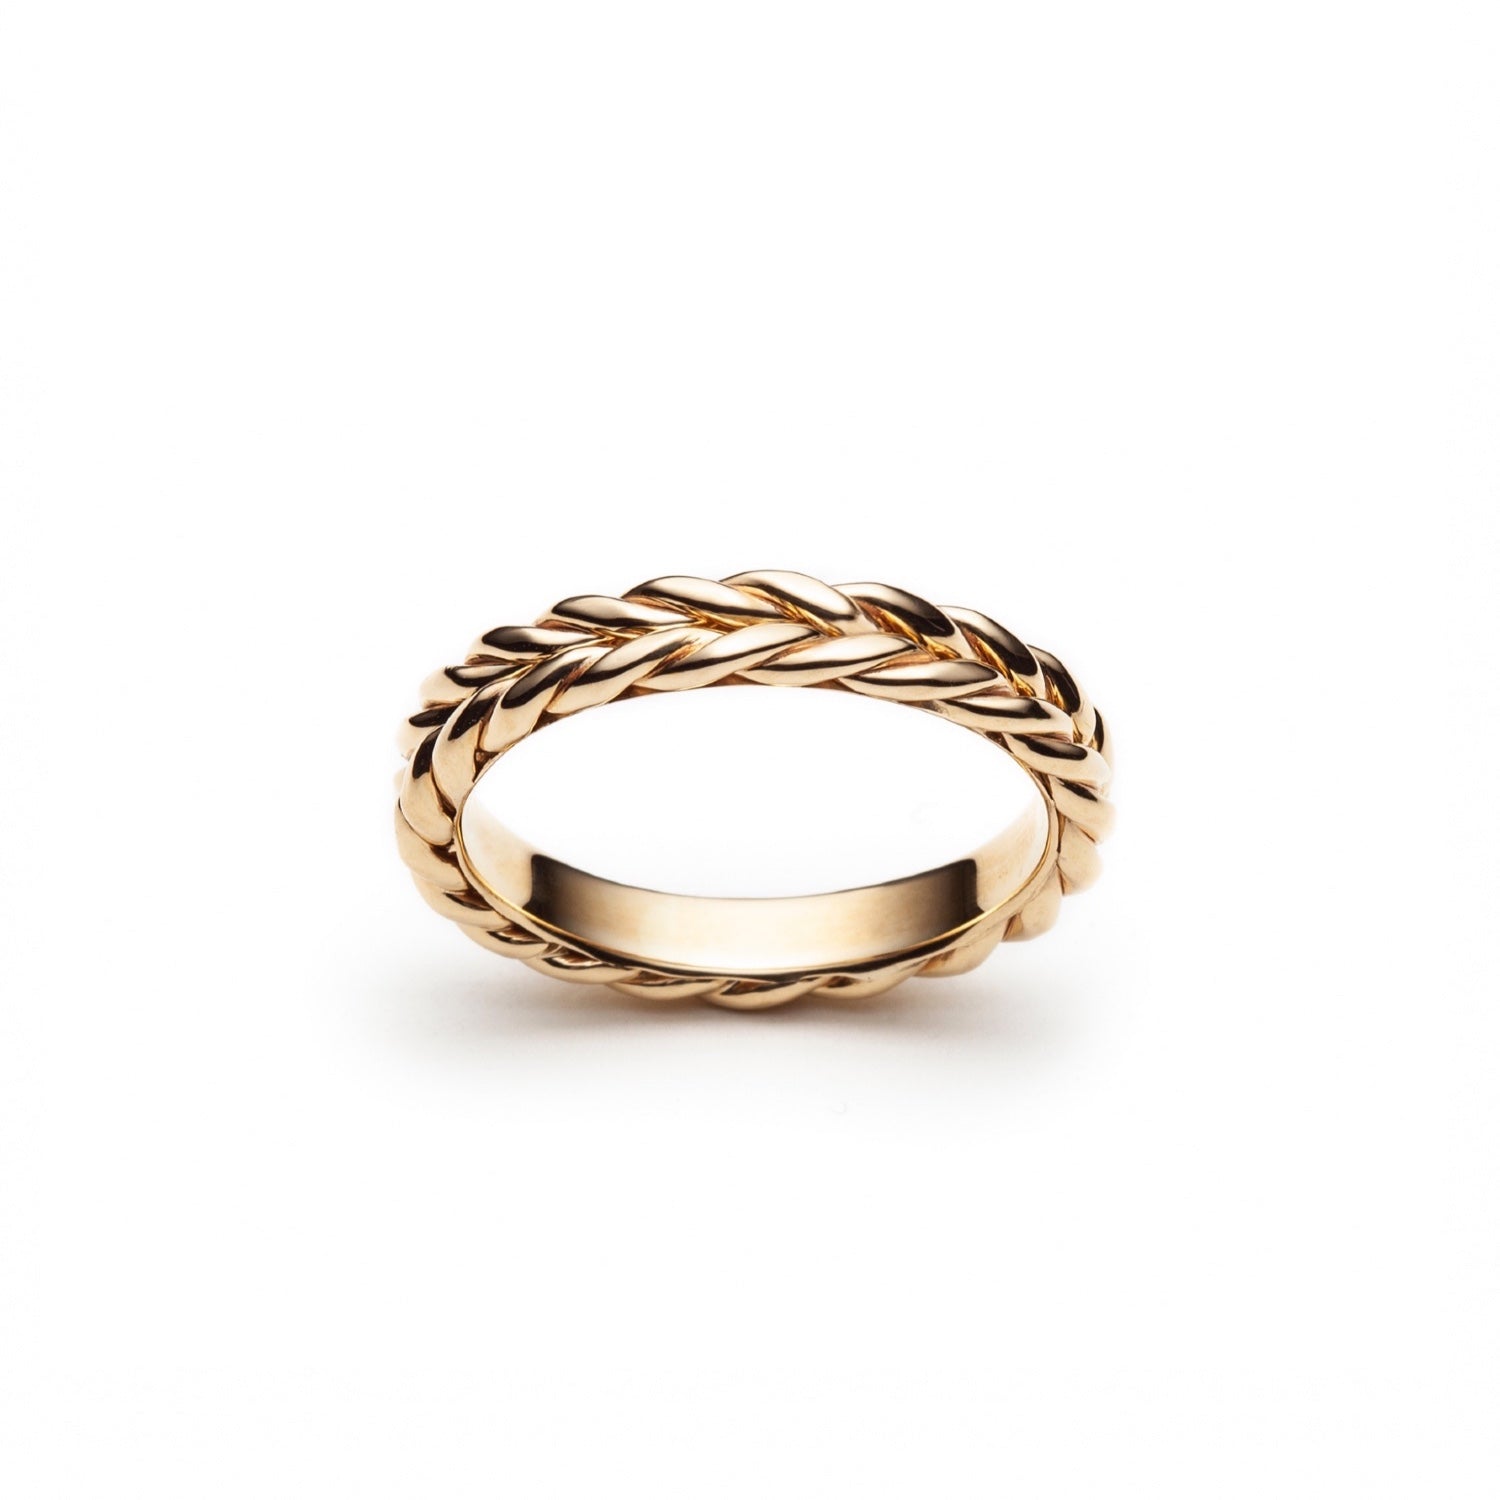 Signature Braided Polished Finish Standard Fit 4-5 mm Wedding Band in Yellow Gold